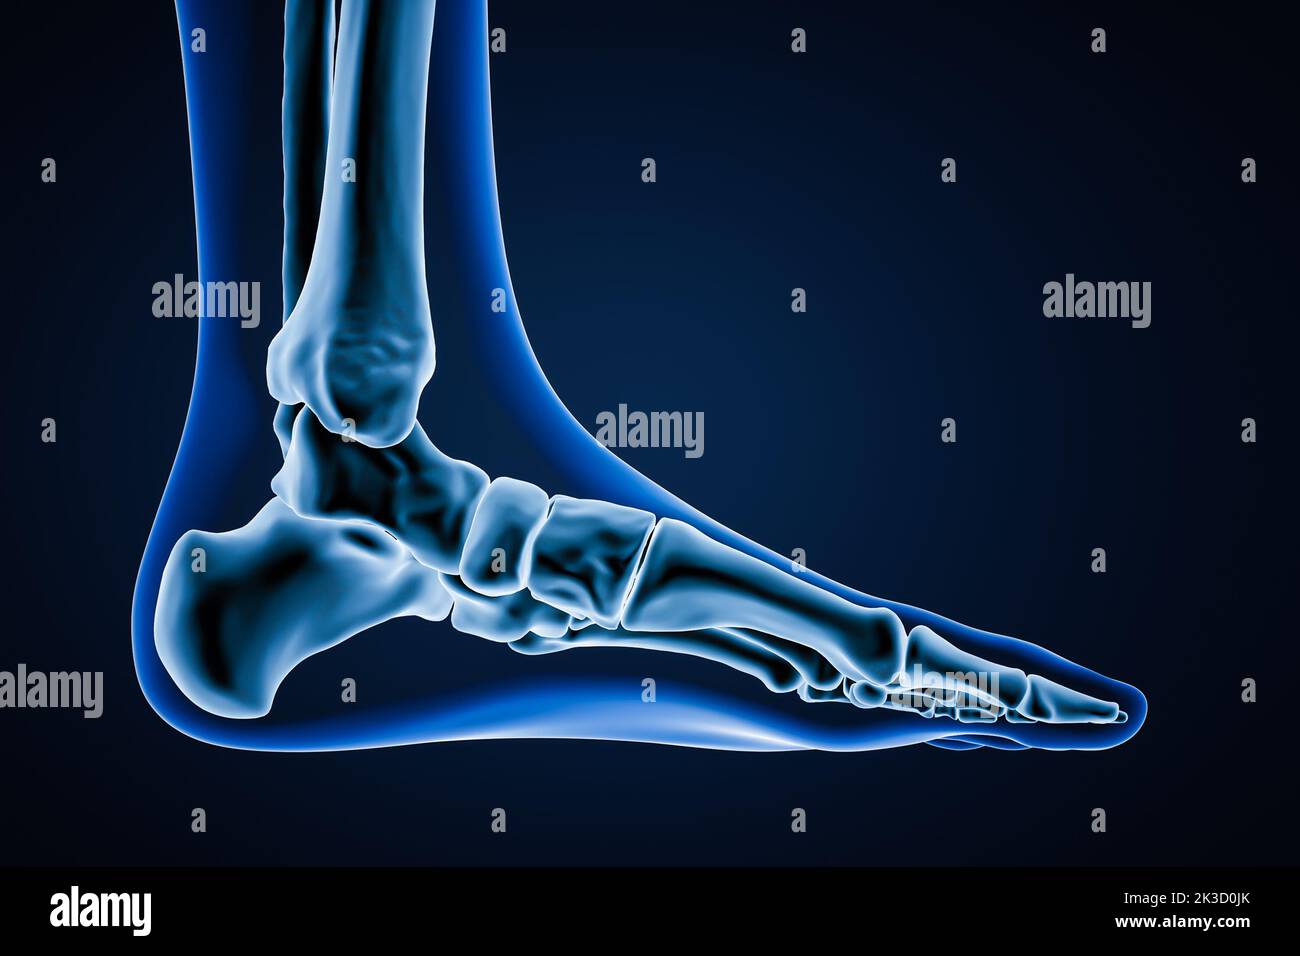 Medial view of accurate human left foot bones with body contours on blue background 3D rendering illustration. Anatomy, osteology, orthopedics concept Stock Photo